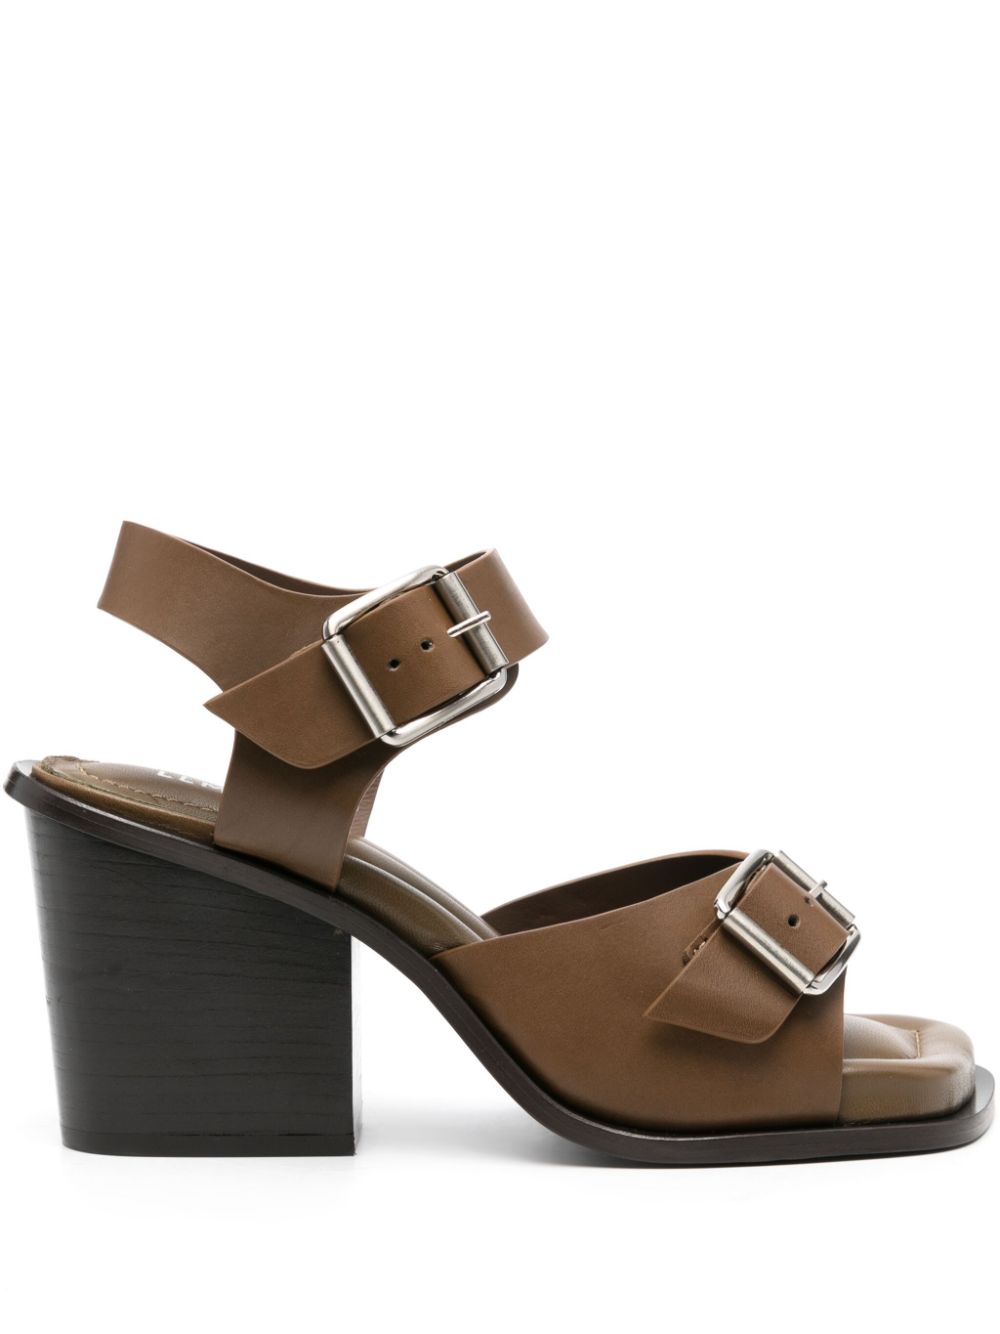 LEMAIRE 90mm leather sandals - Brown von LEMAIRE